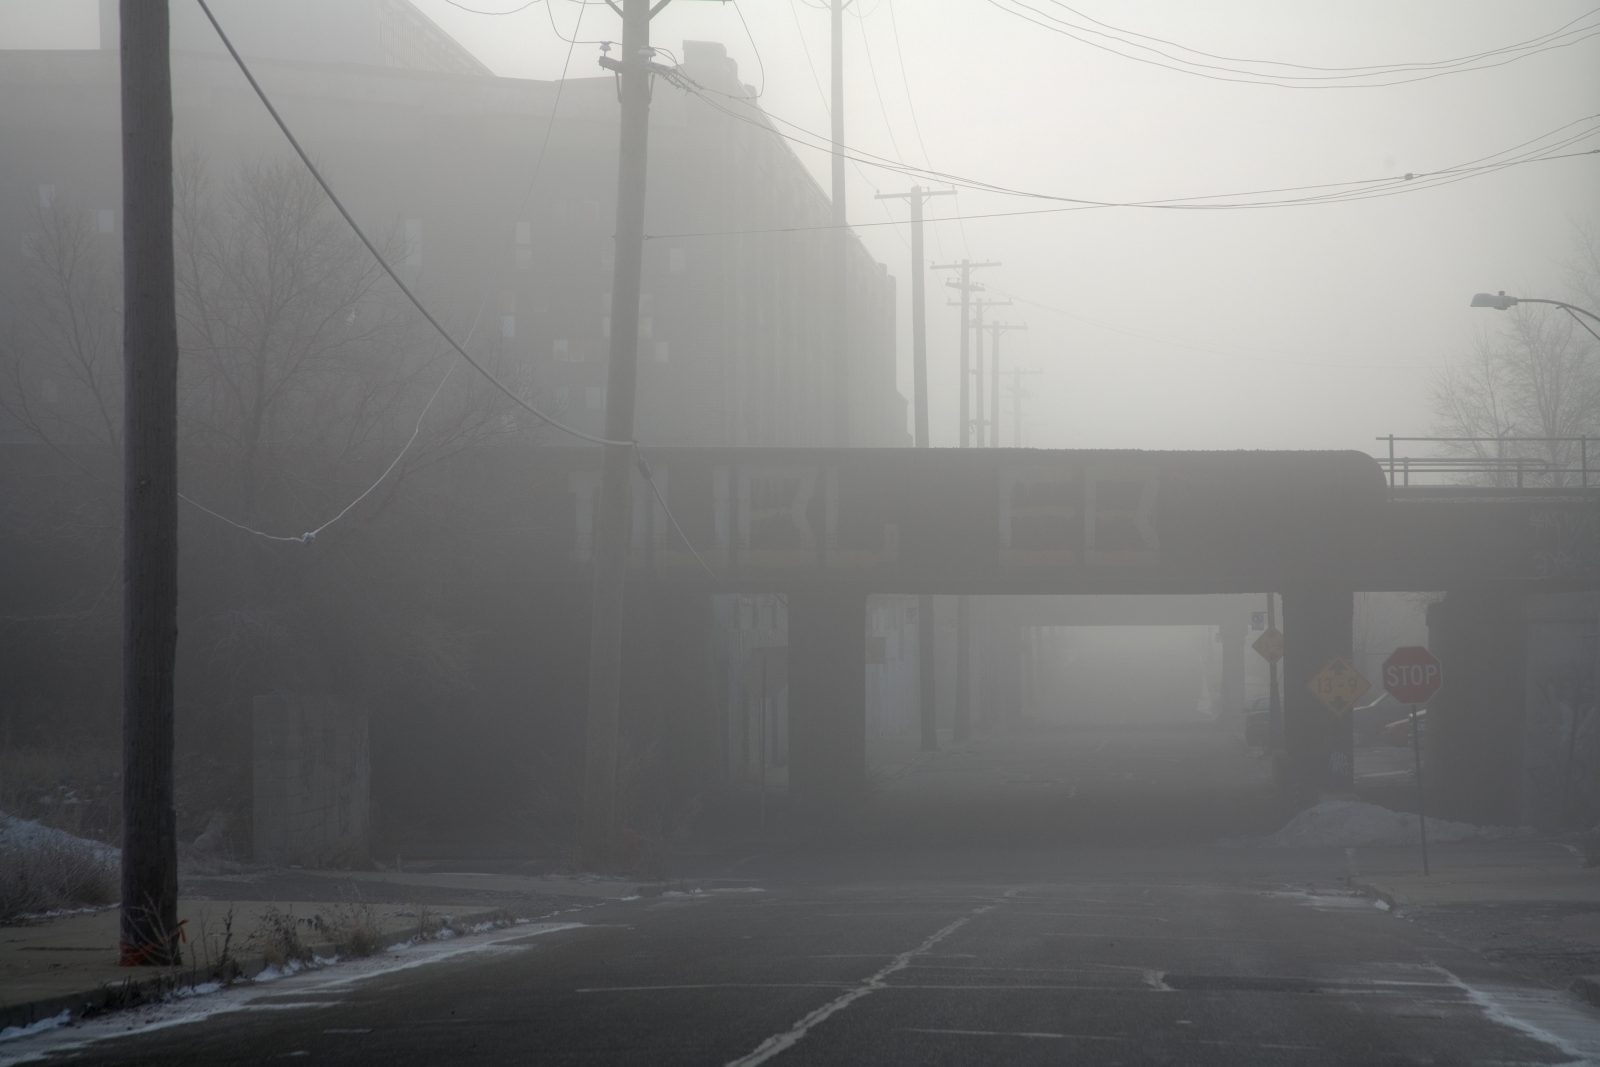 A foggy morning in Detroit